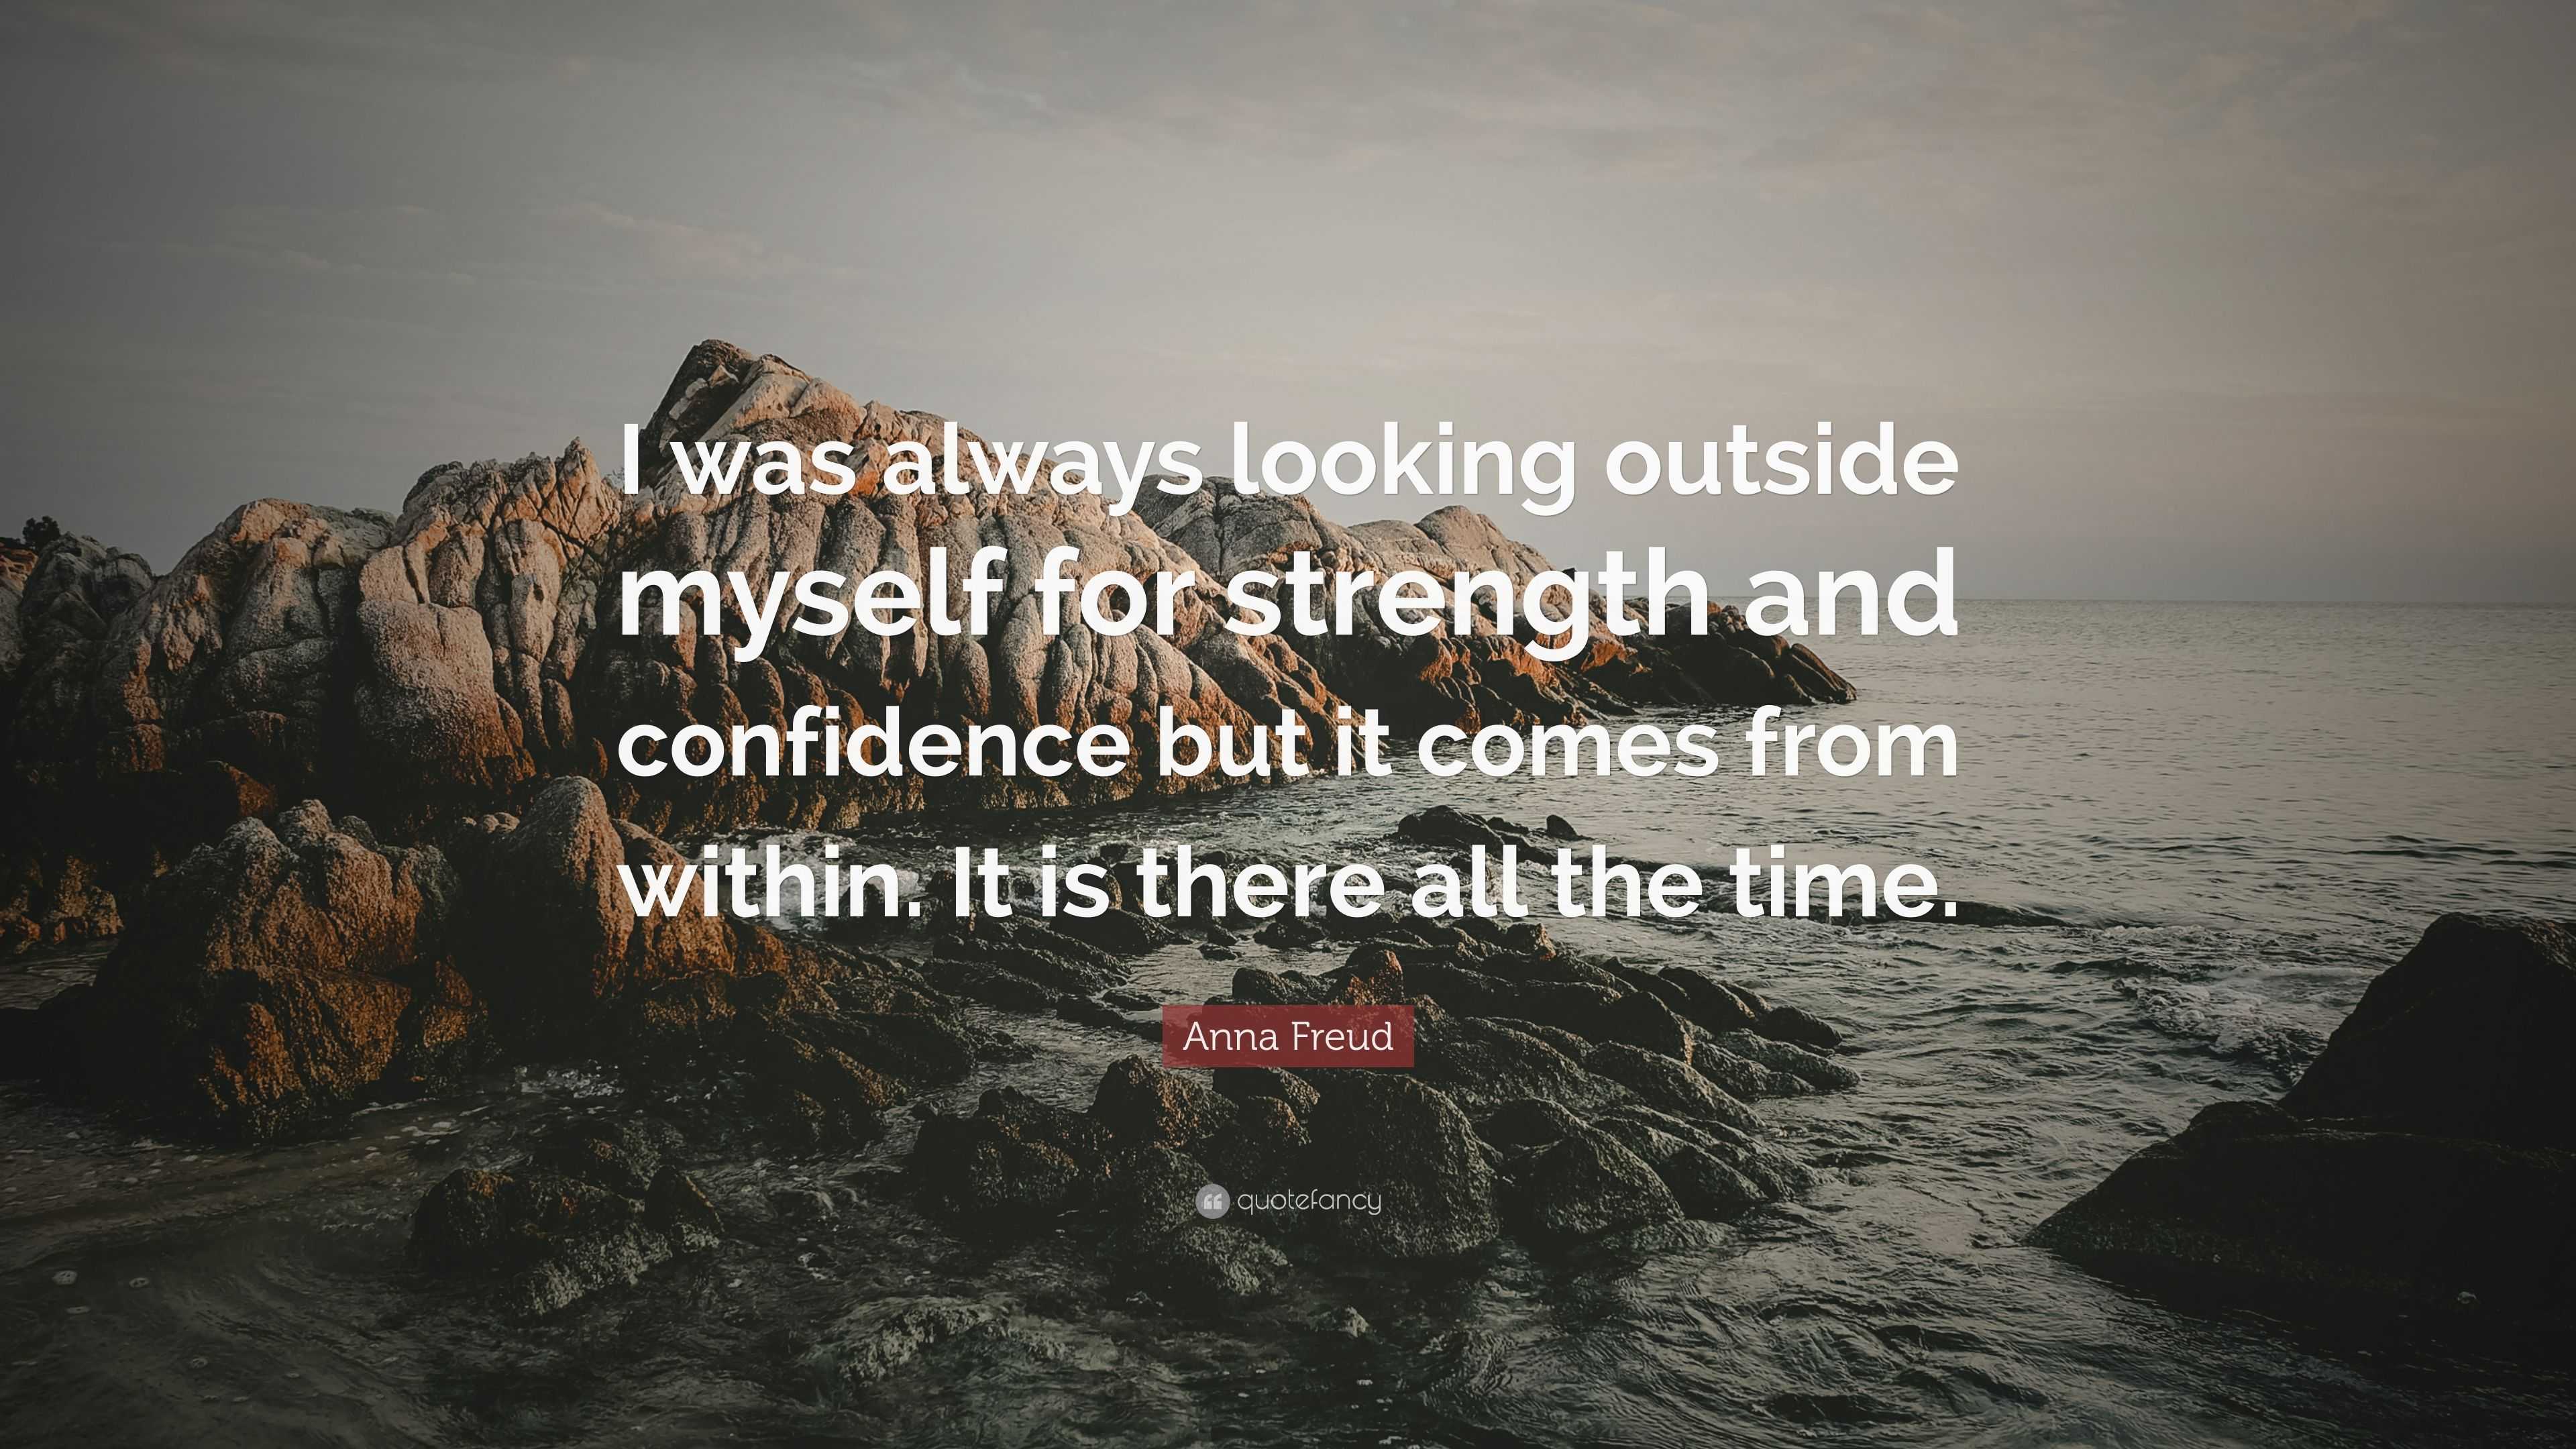 Anna Freud Quote “i Was Always Looking Outside Myself For Strength And Confidence But It Comes